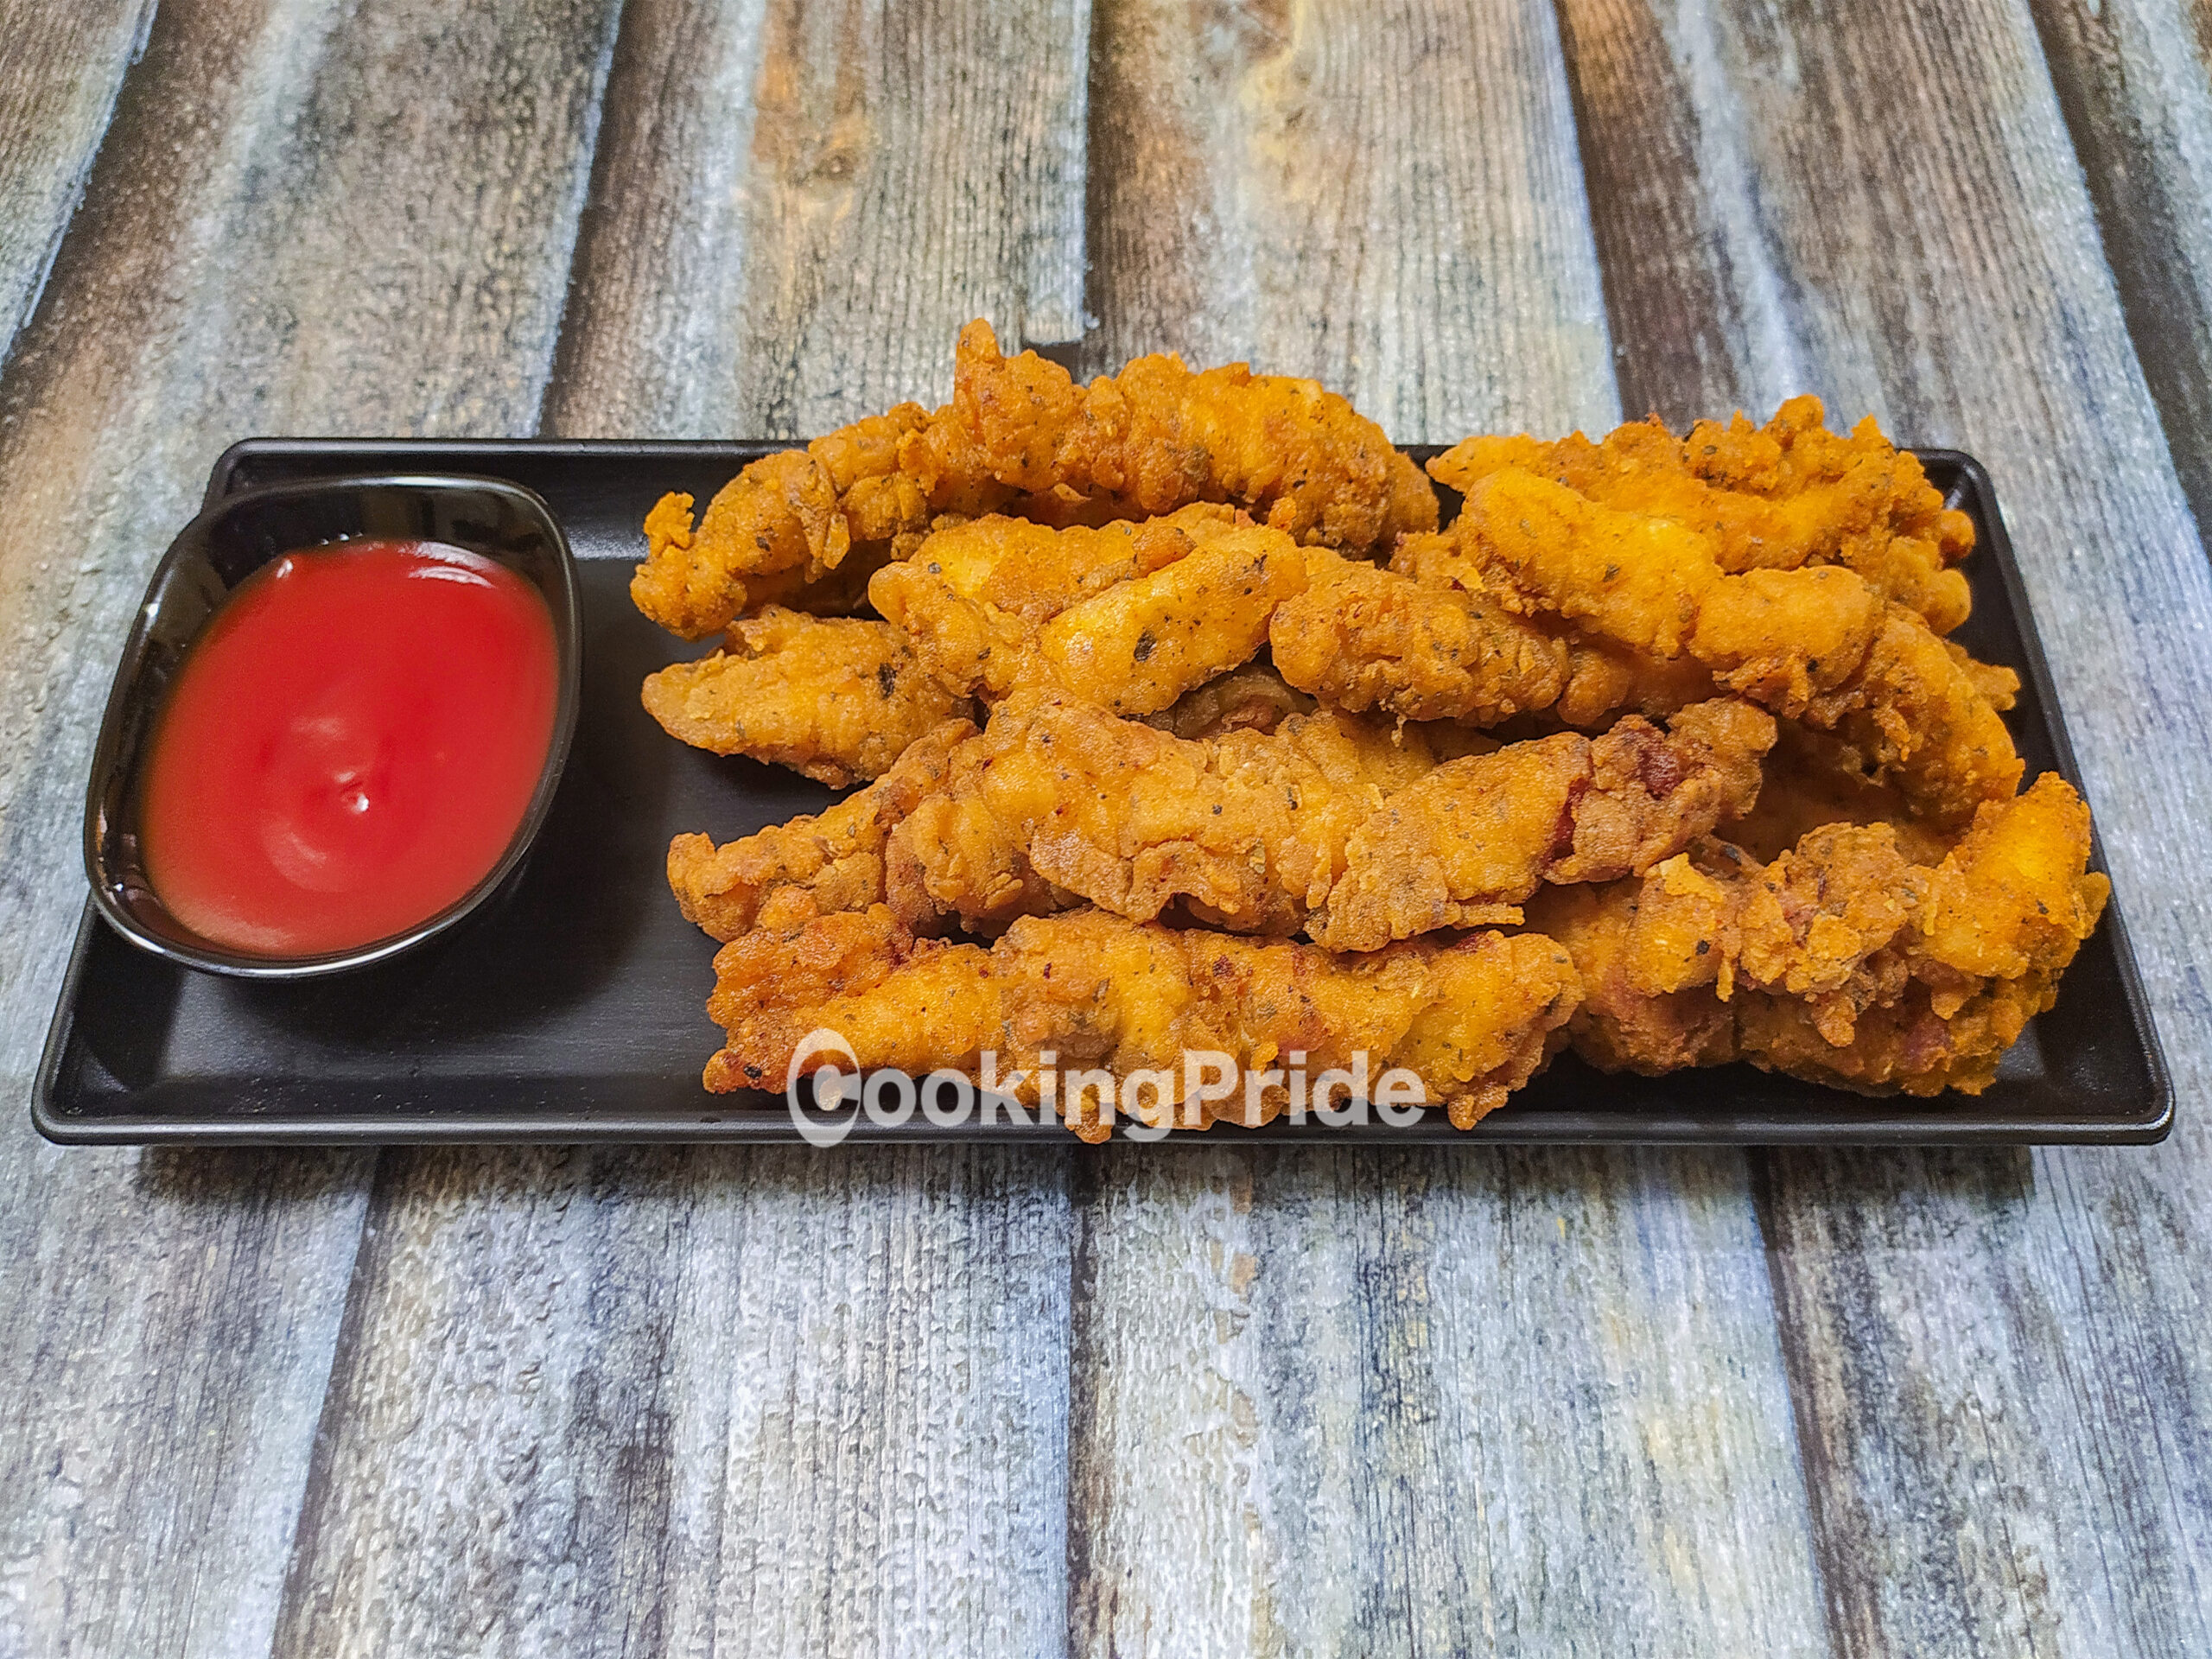 Crispy Chicken Strips by CookingPride Served in Black Plate with Tomato Sauce